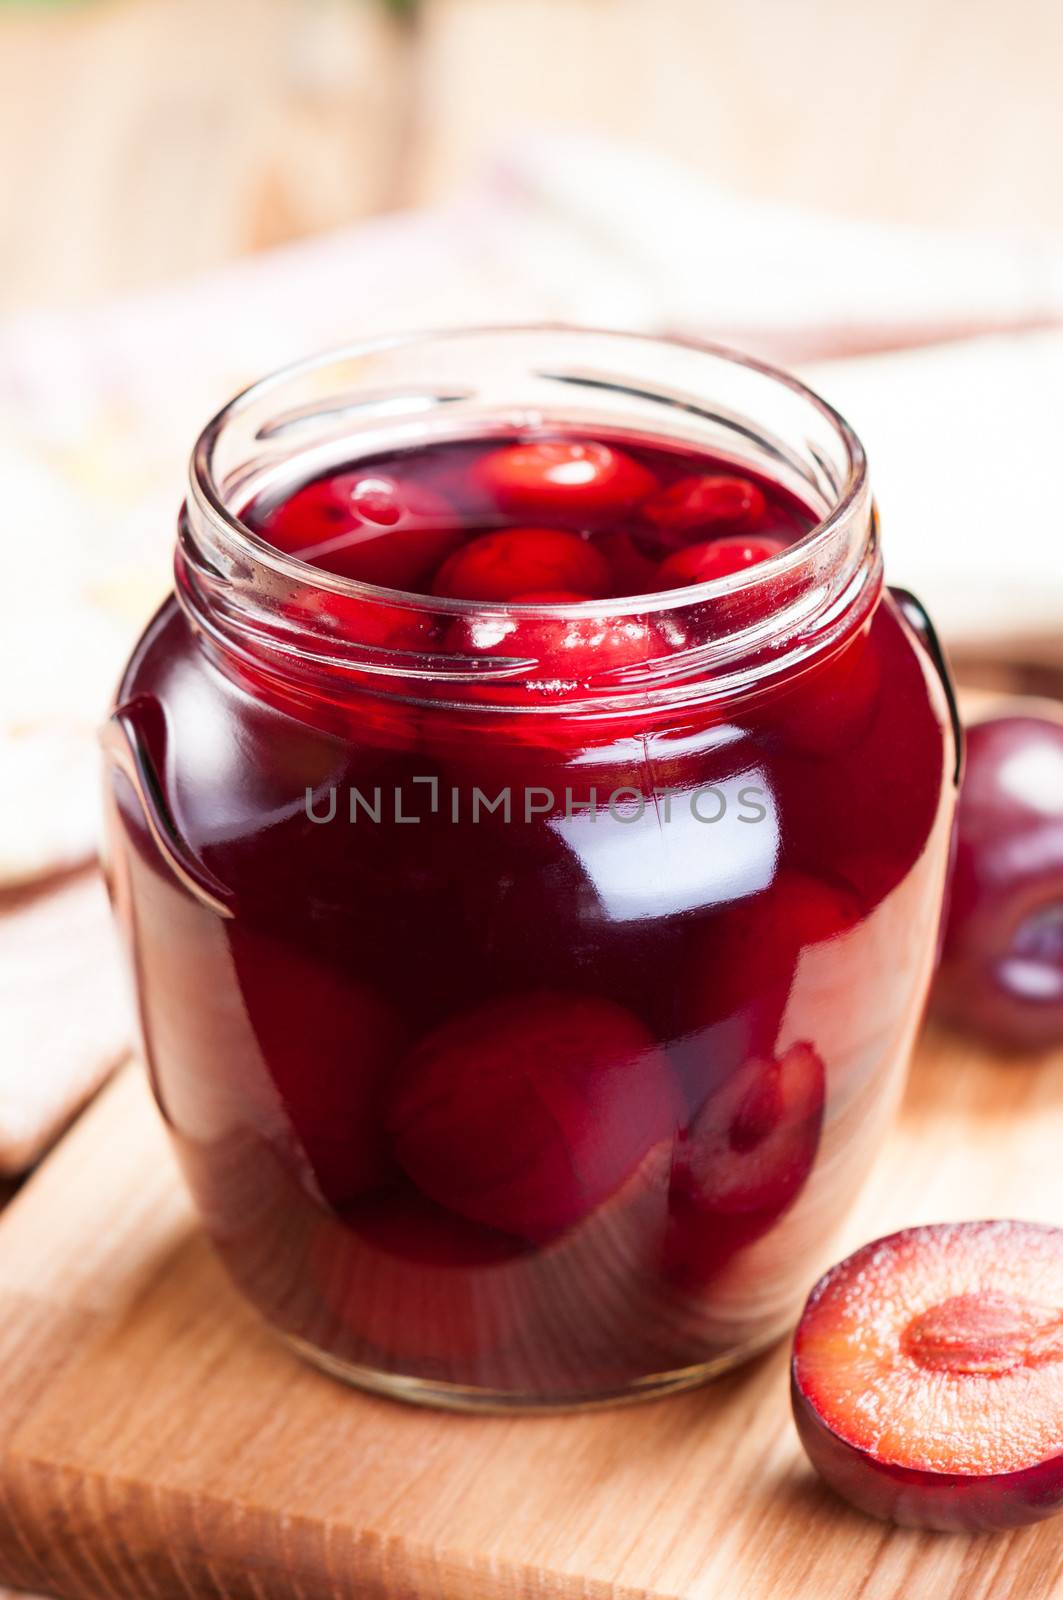 Plum compote in jar close up. by BPhoto